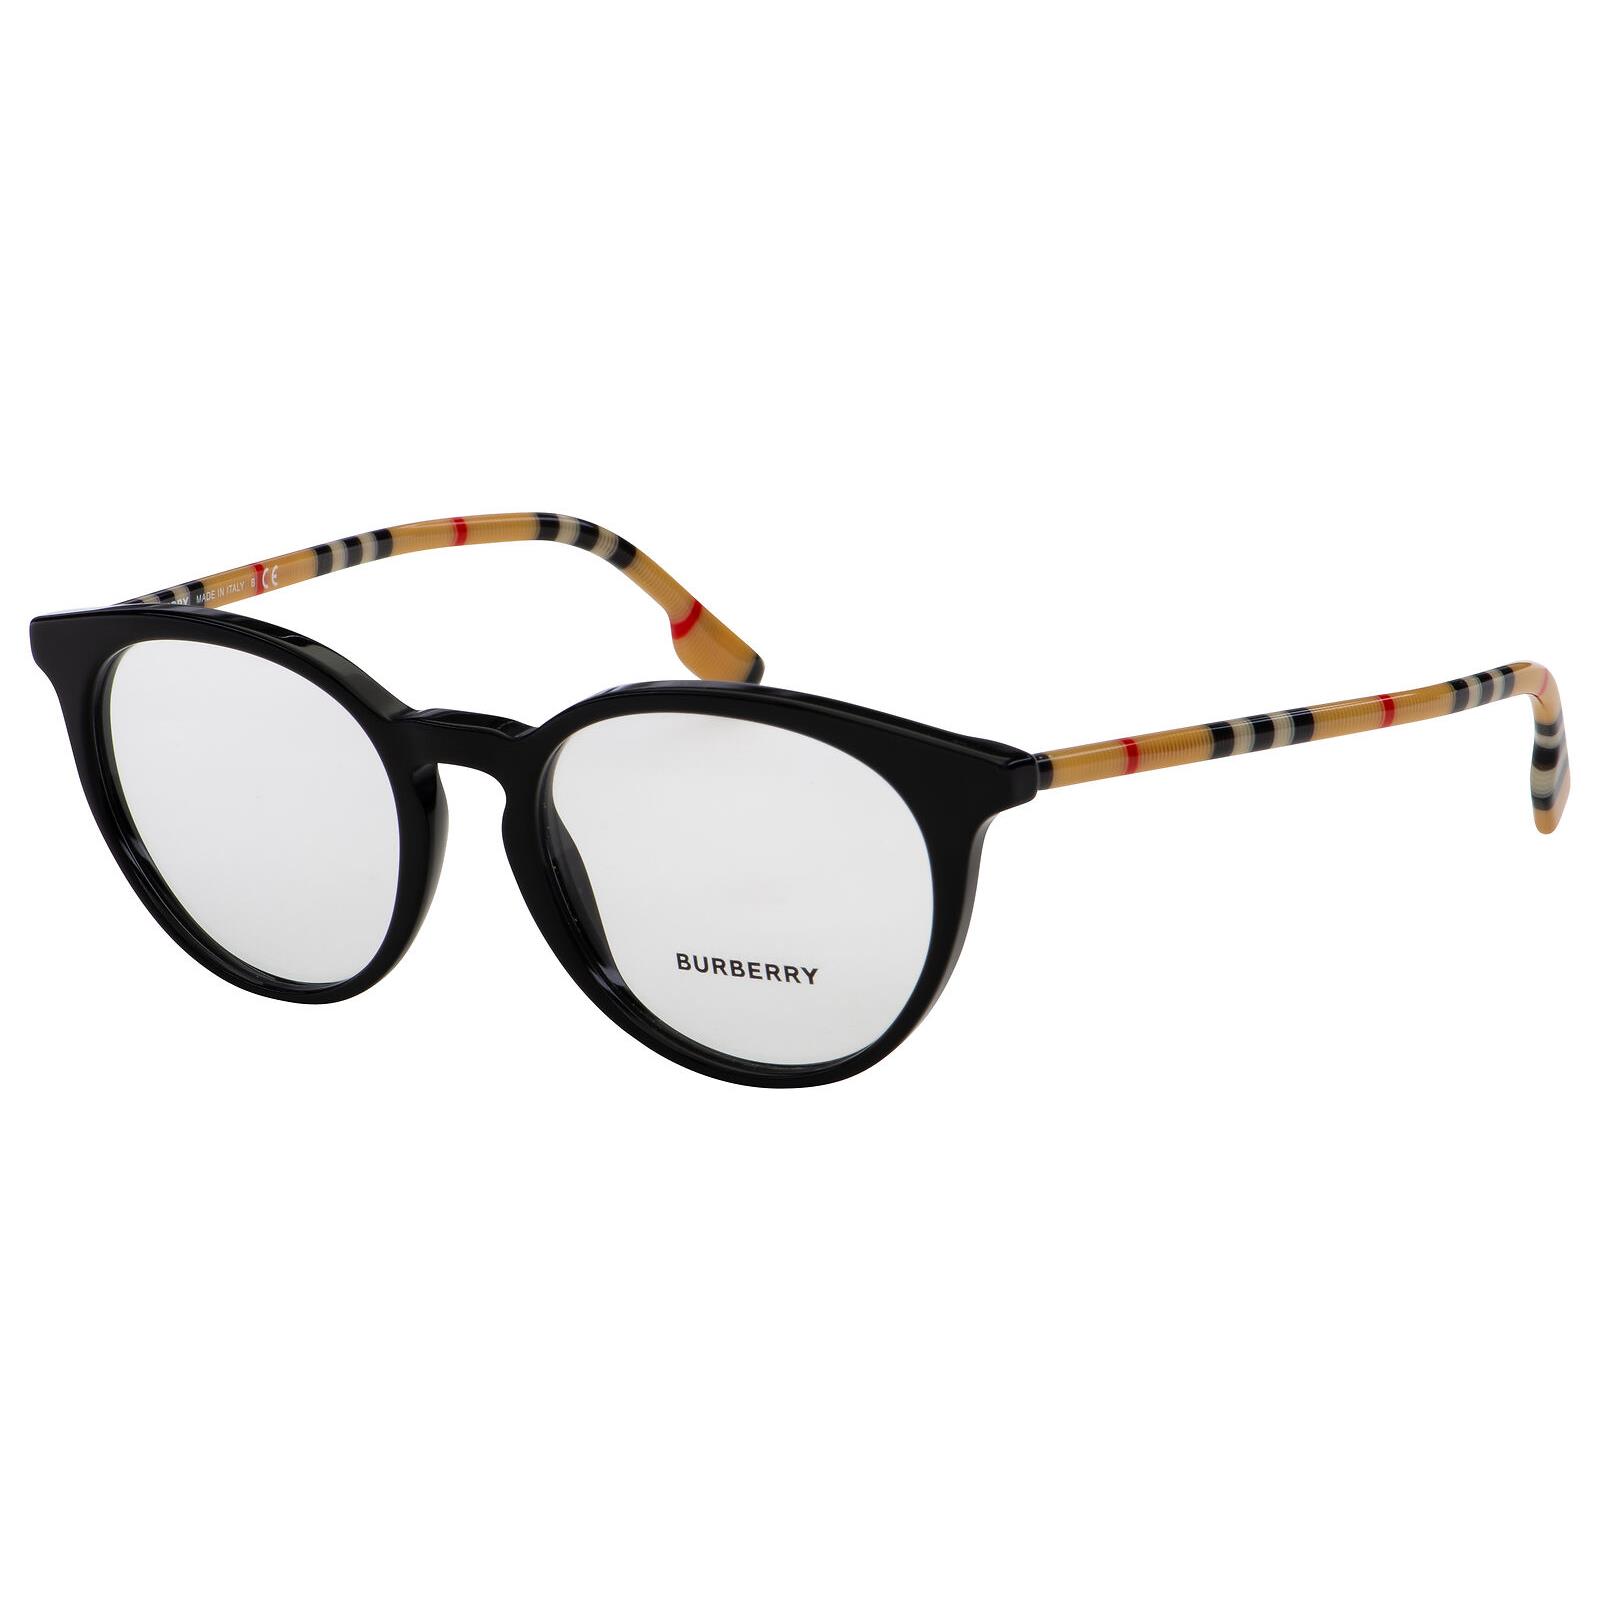 Burberry BE 2318 Chalcot 3853 Black/vintage Check Eyeglasses W/ Case 51-18 - Black/Vintage Check Frame, Clear, Ready for your RX Lens, 3853 Code